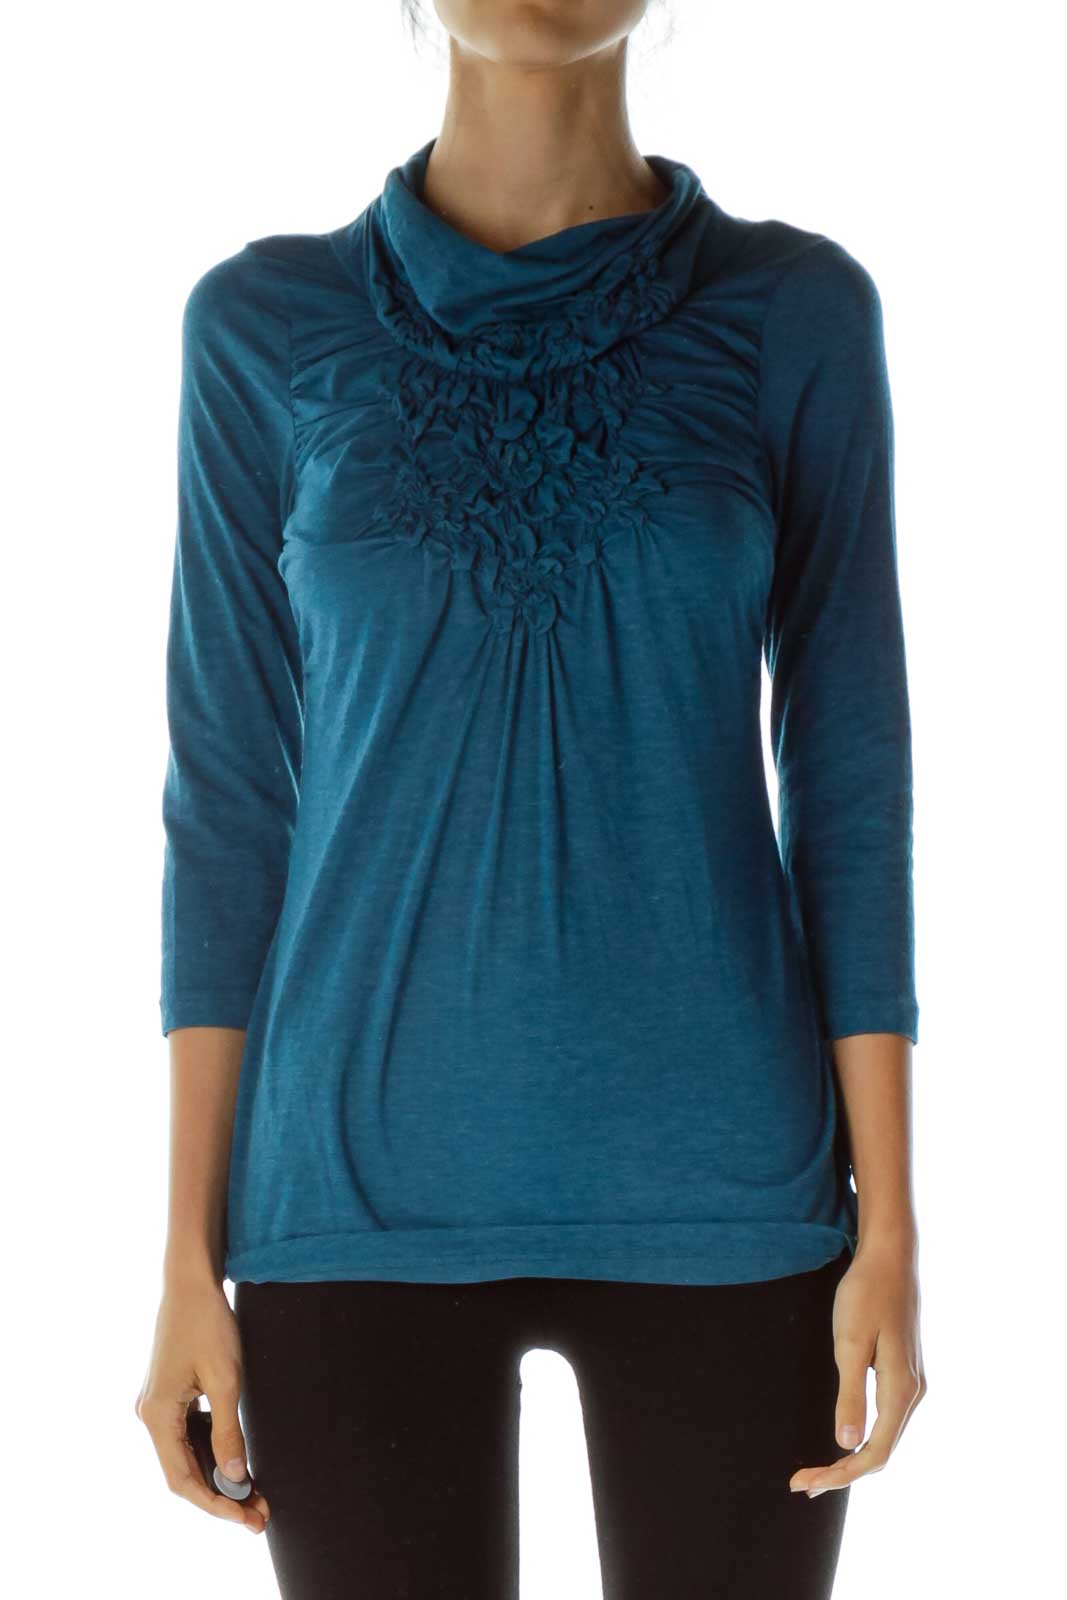 Blue Ruffled Neck Knit Top Front